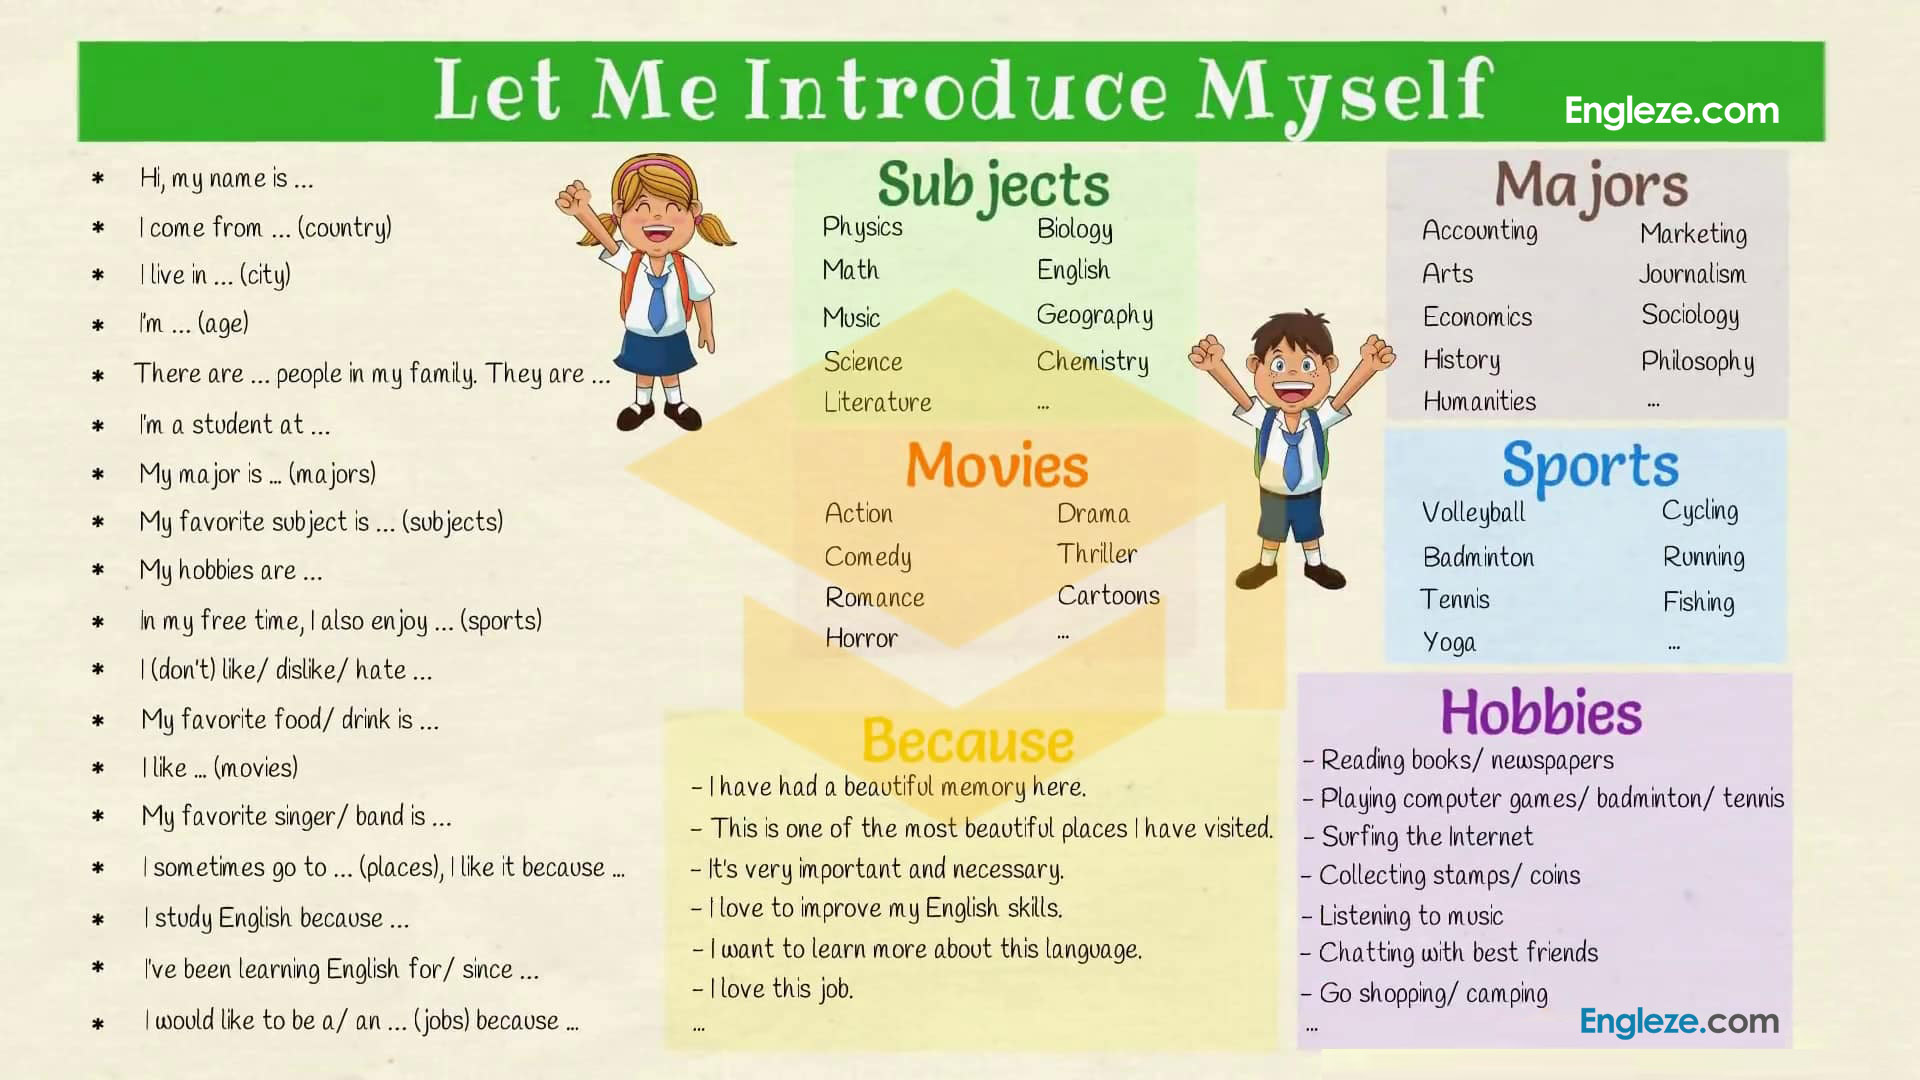 How to Introduce Yourself in English - Image 1.